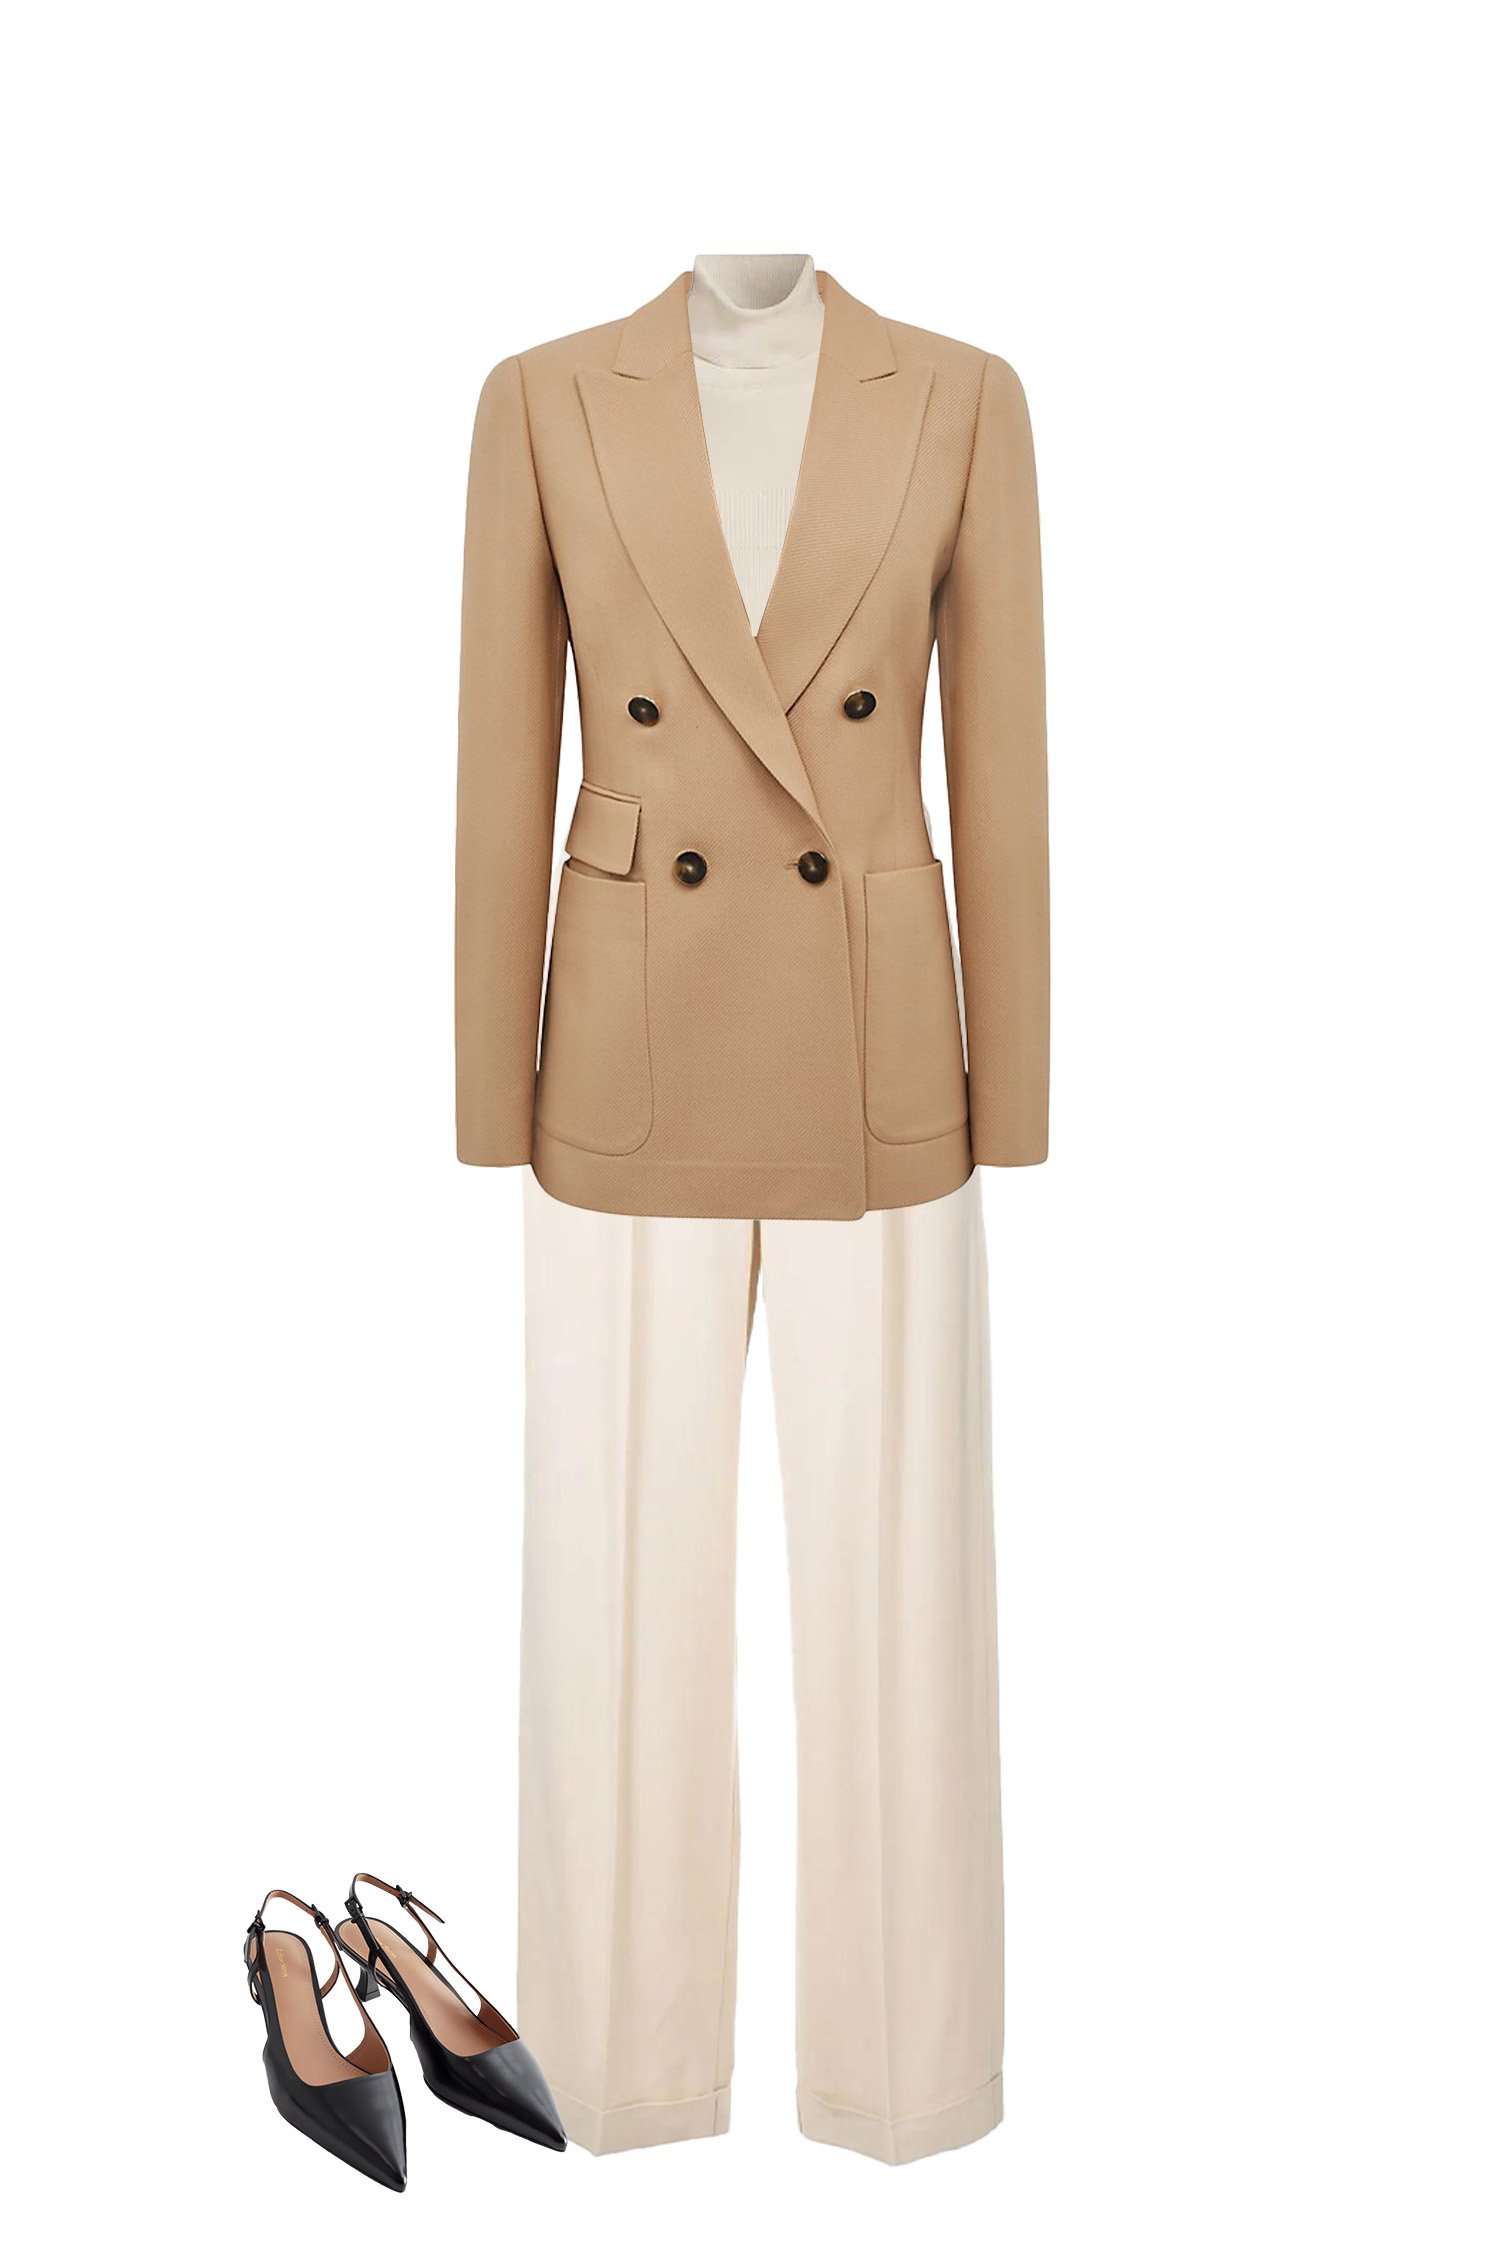 Business Casual Outfit - Cream Wide Leg High-Waisted Pants, Cream Turtleneck Top, Camel Blazer, Black Pointy Toe Sling Backs